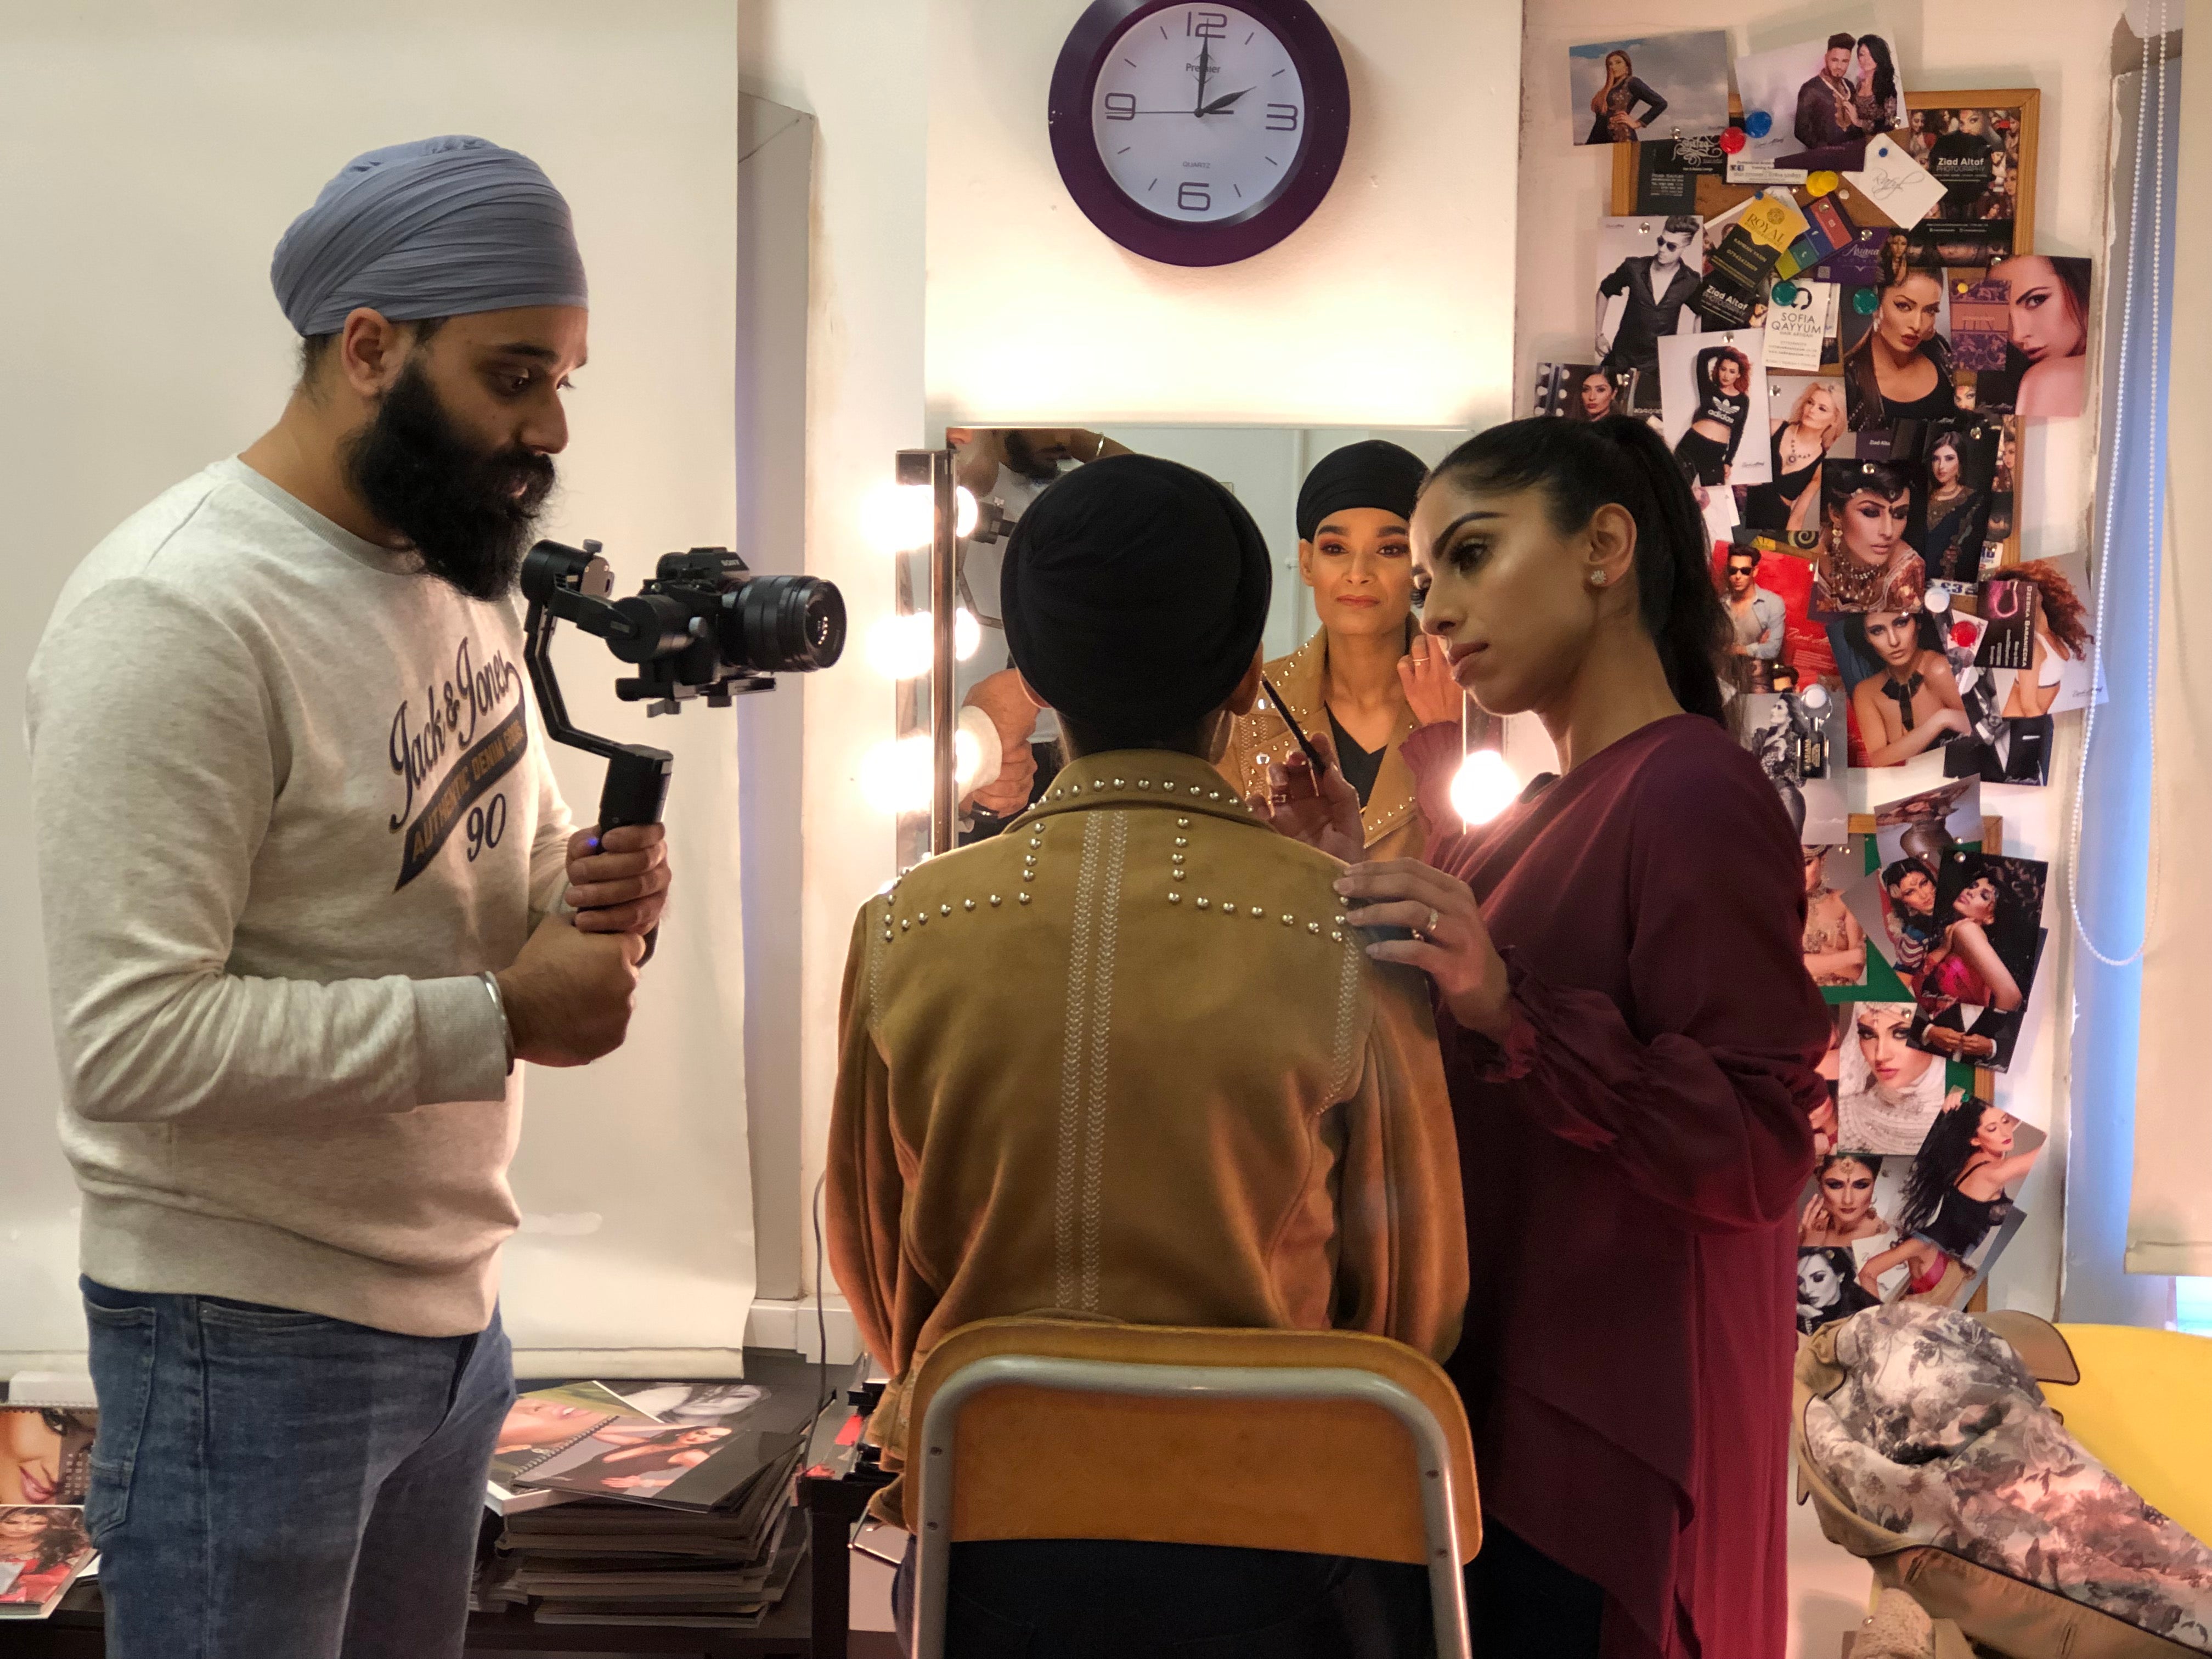 Behind the scenes of our Turban photoshoot